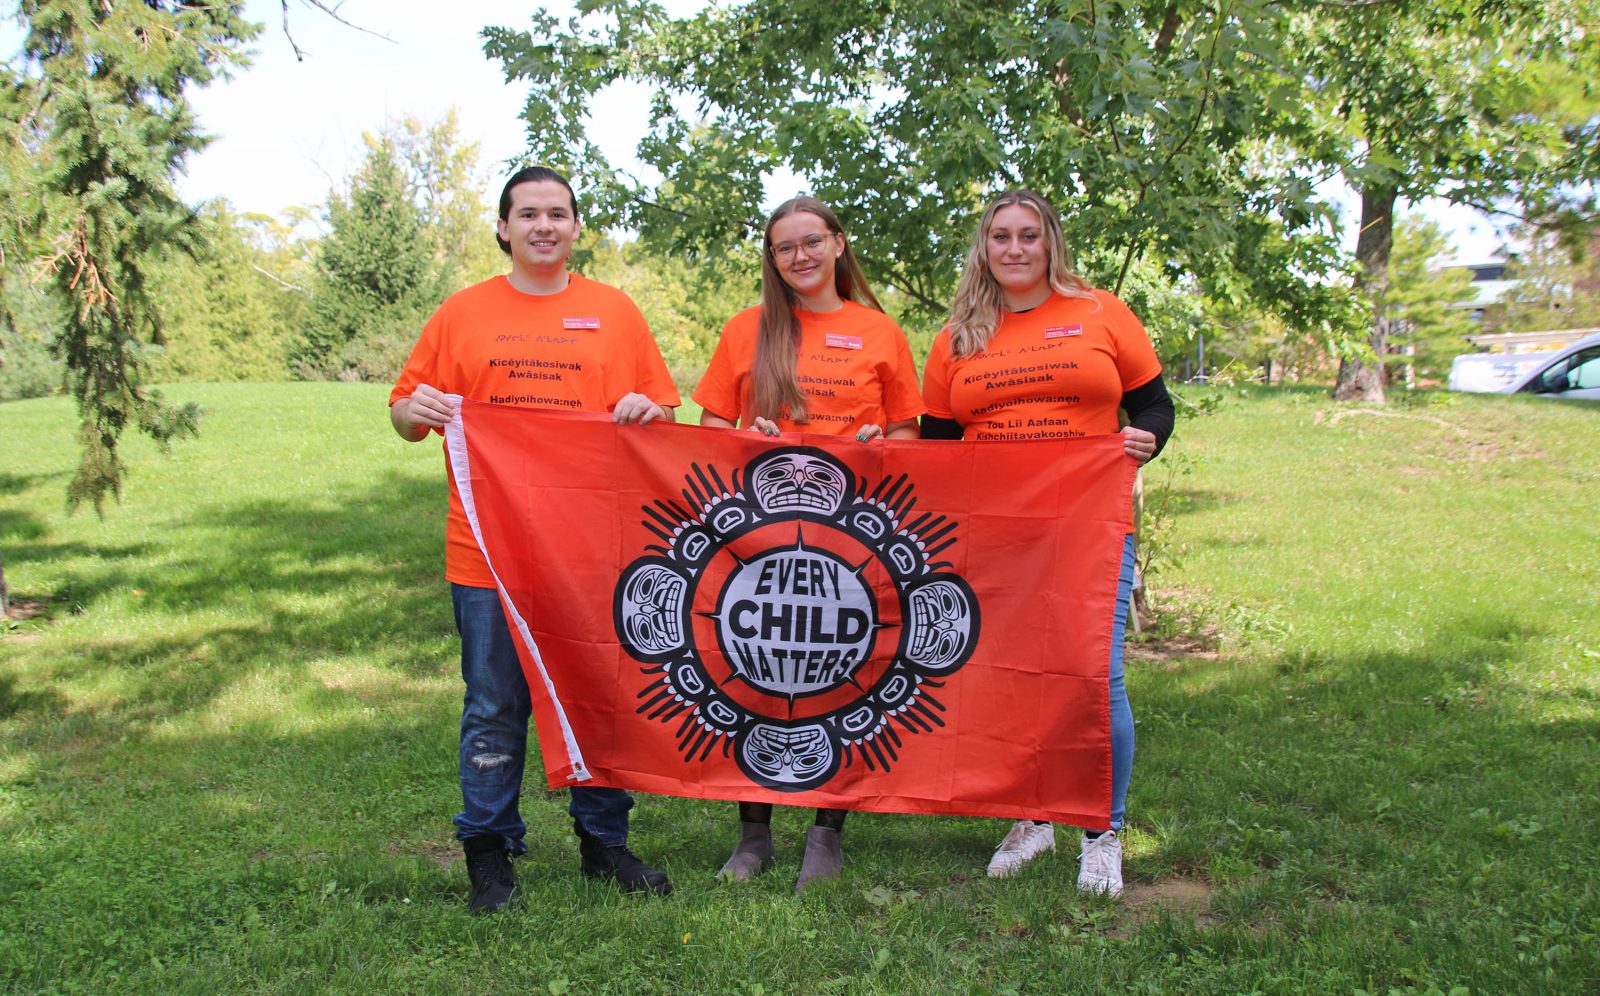 A man and two women stand in an outdoor setting wearing orange shirts and holding a flag that says ‘Every Child Matters.’